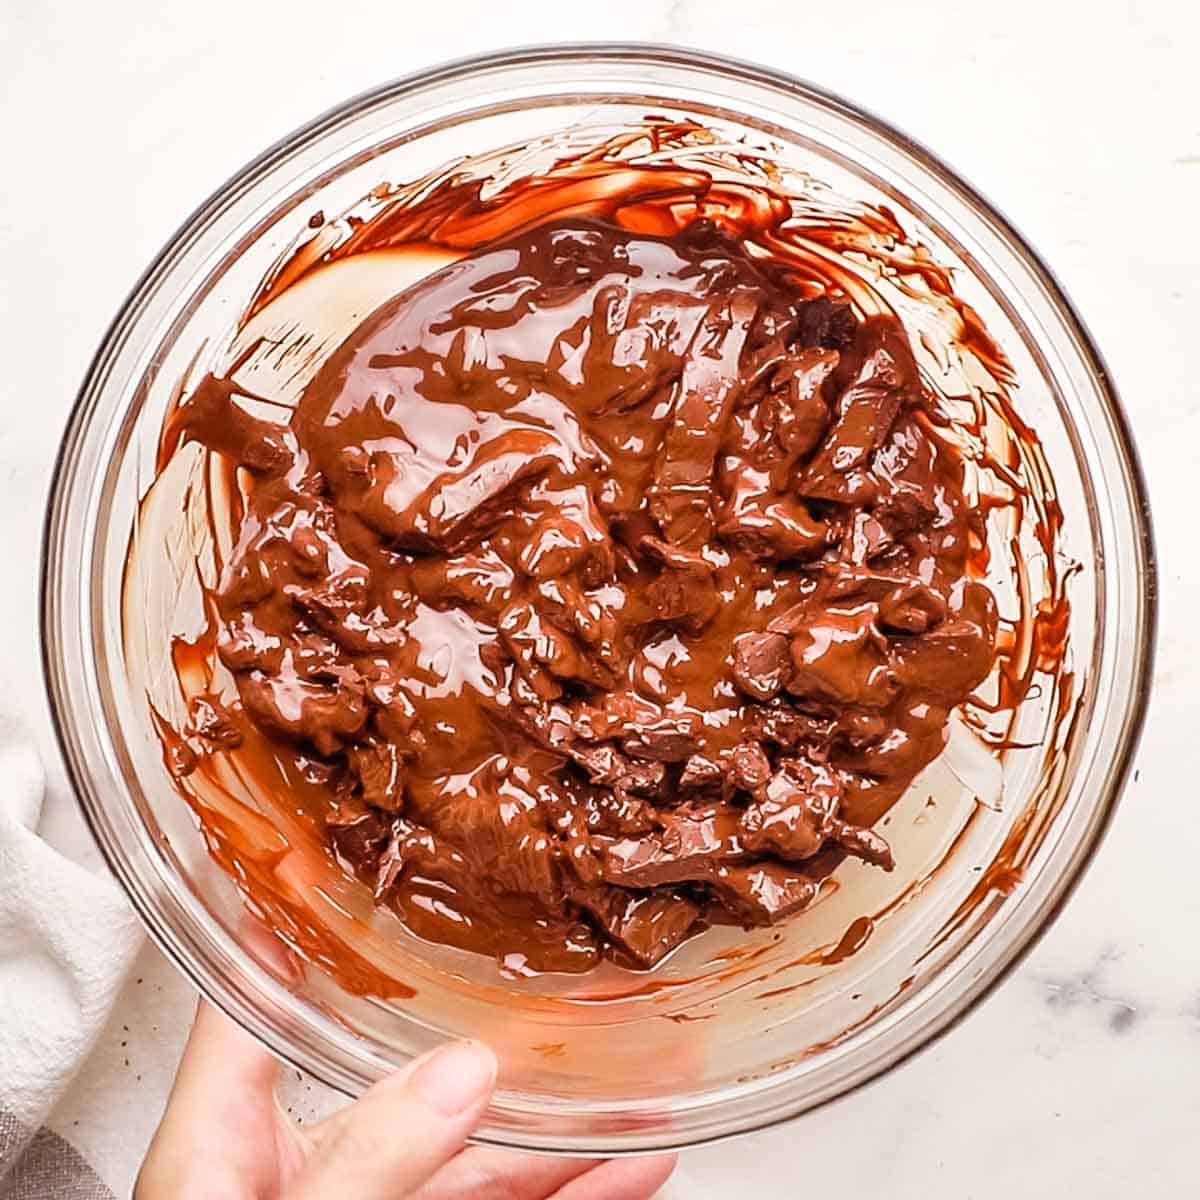 A bowl of partially melted chocolate.